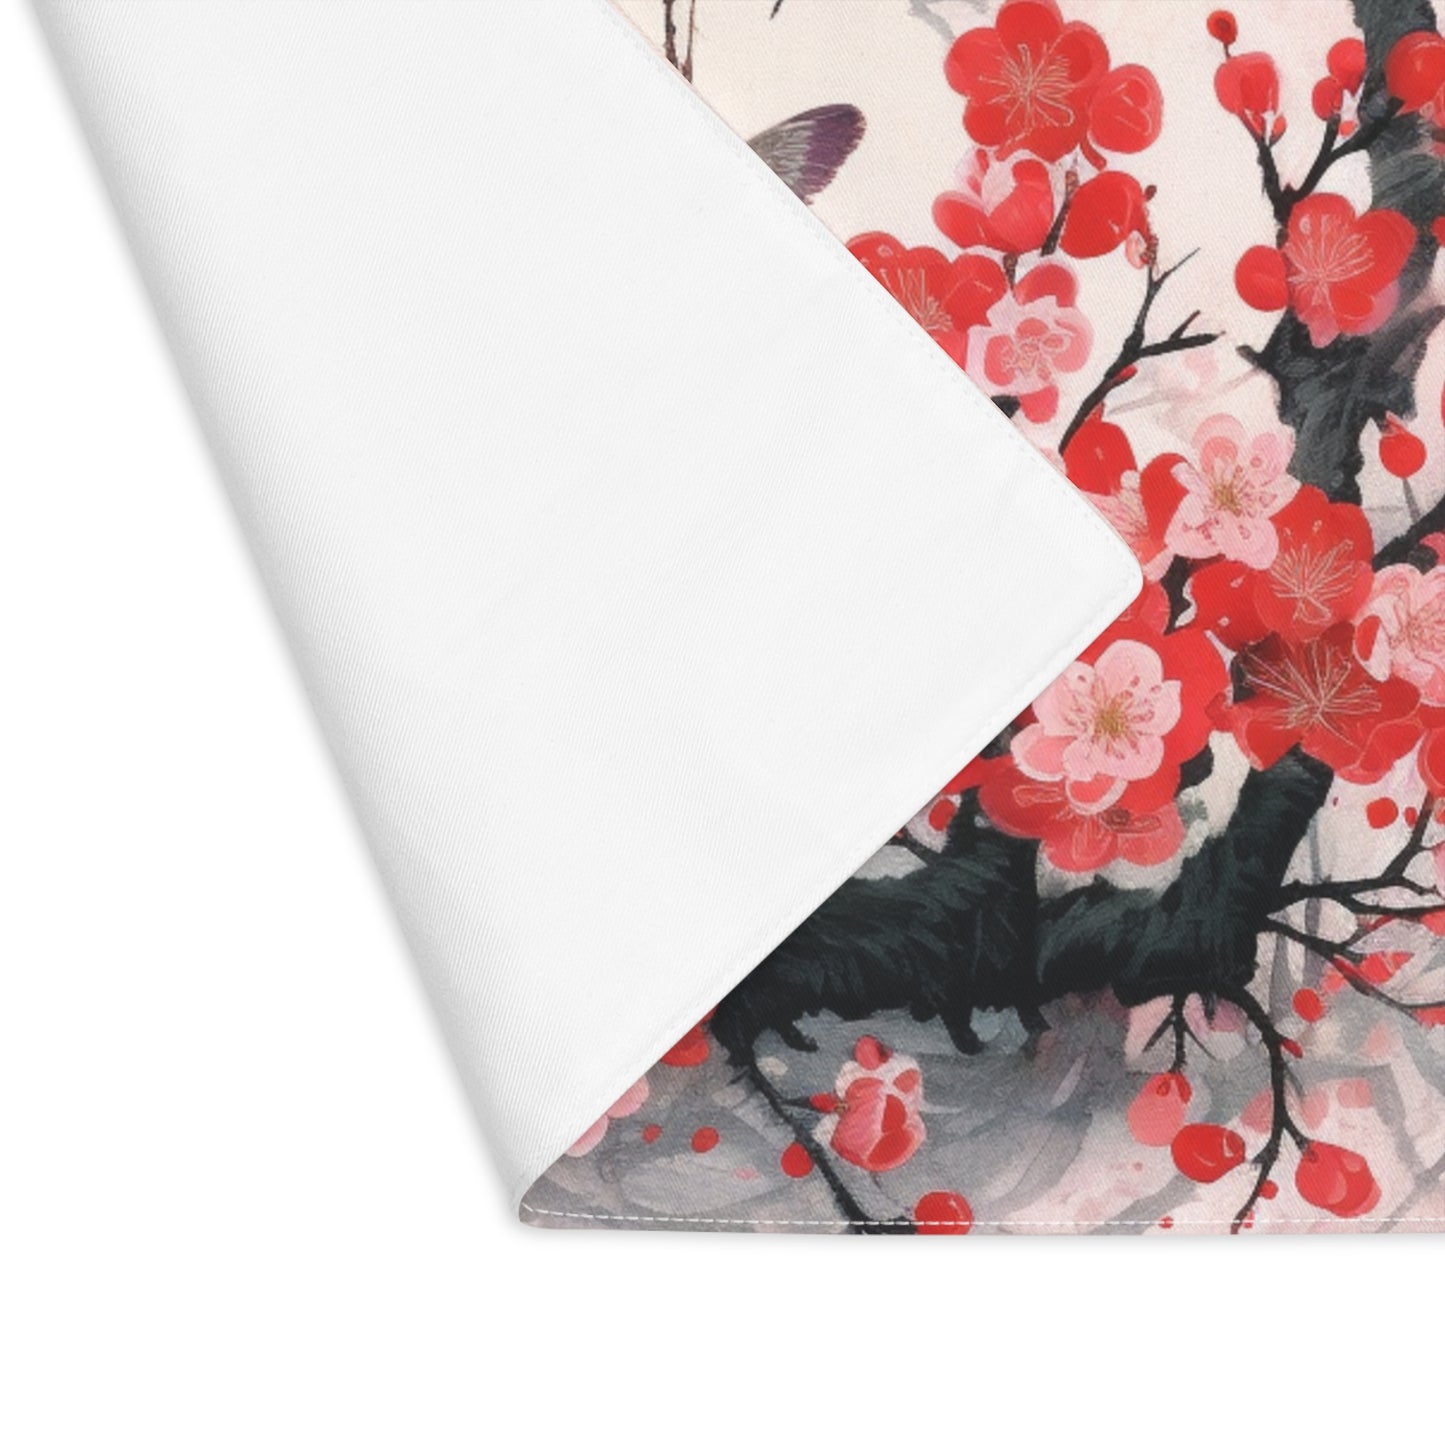 Cherry Blossom Delight: Placemat Adorned with Intricate Flower Drawings and Artistry